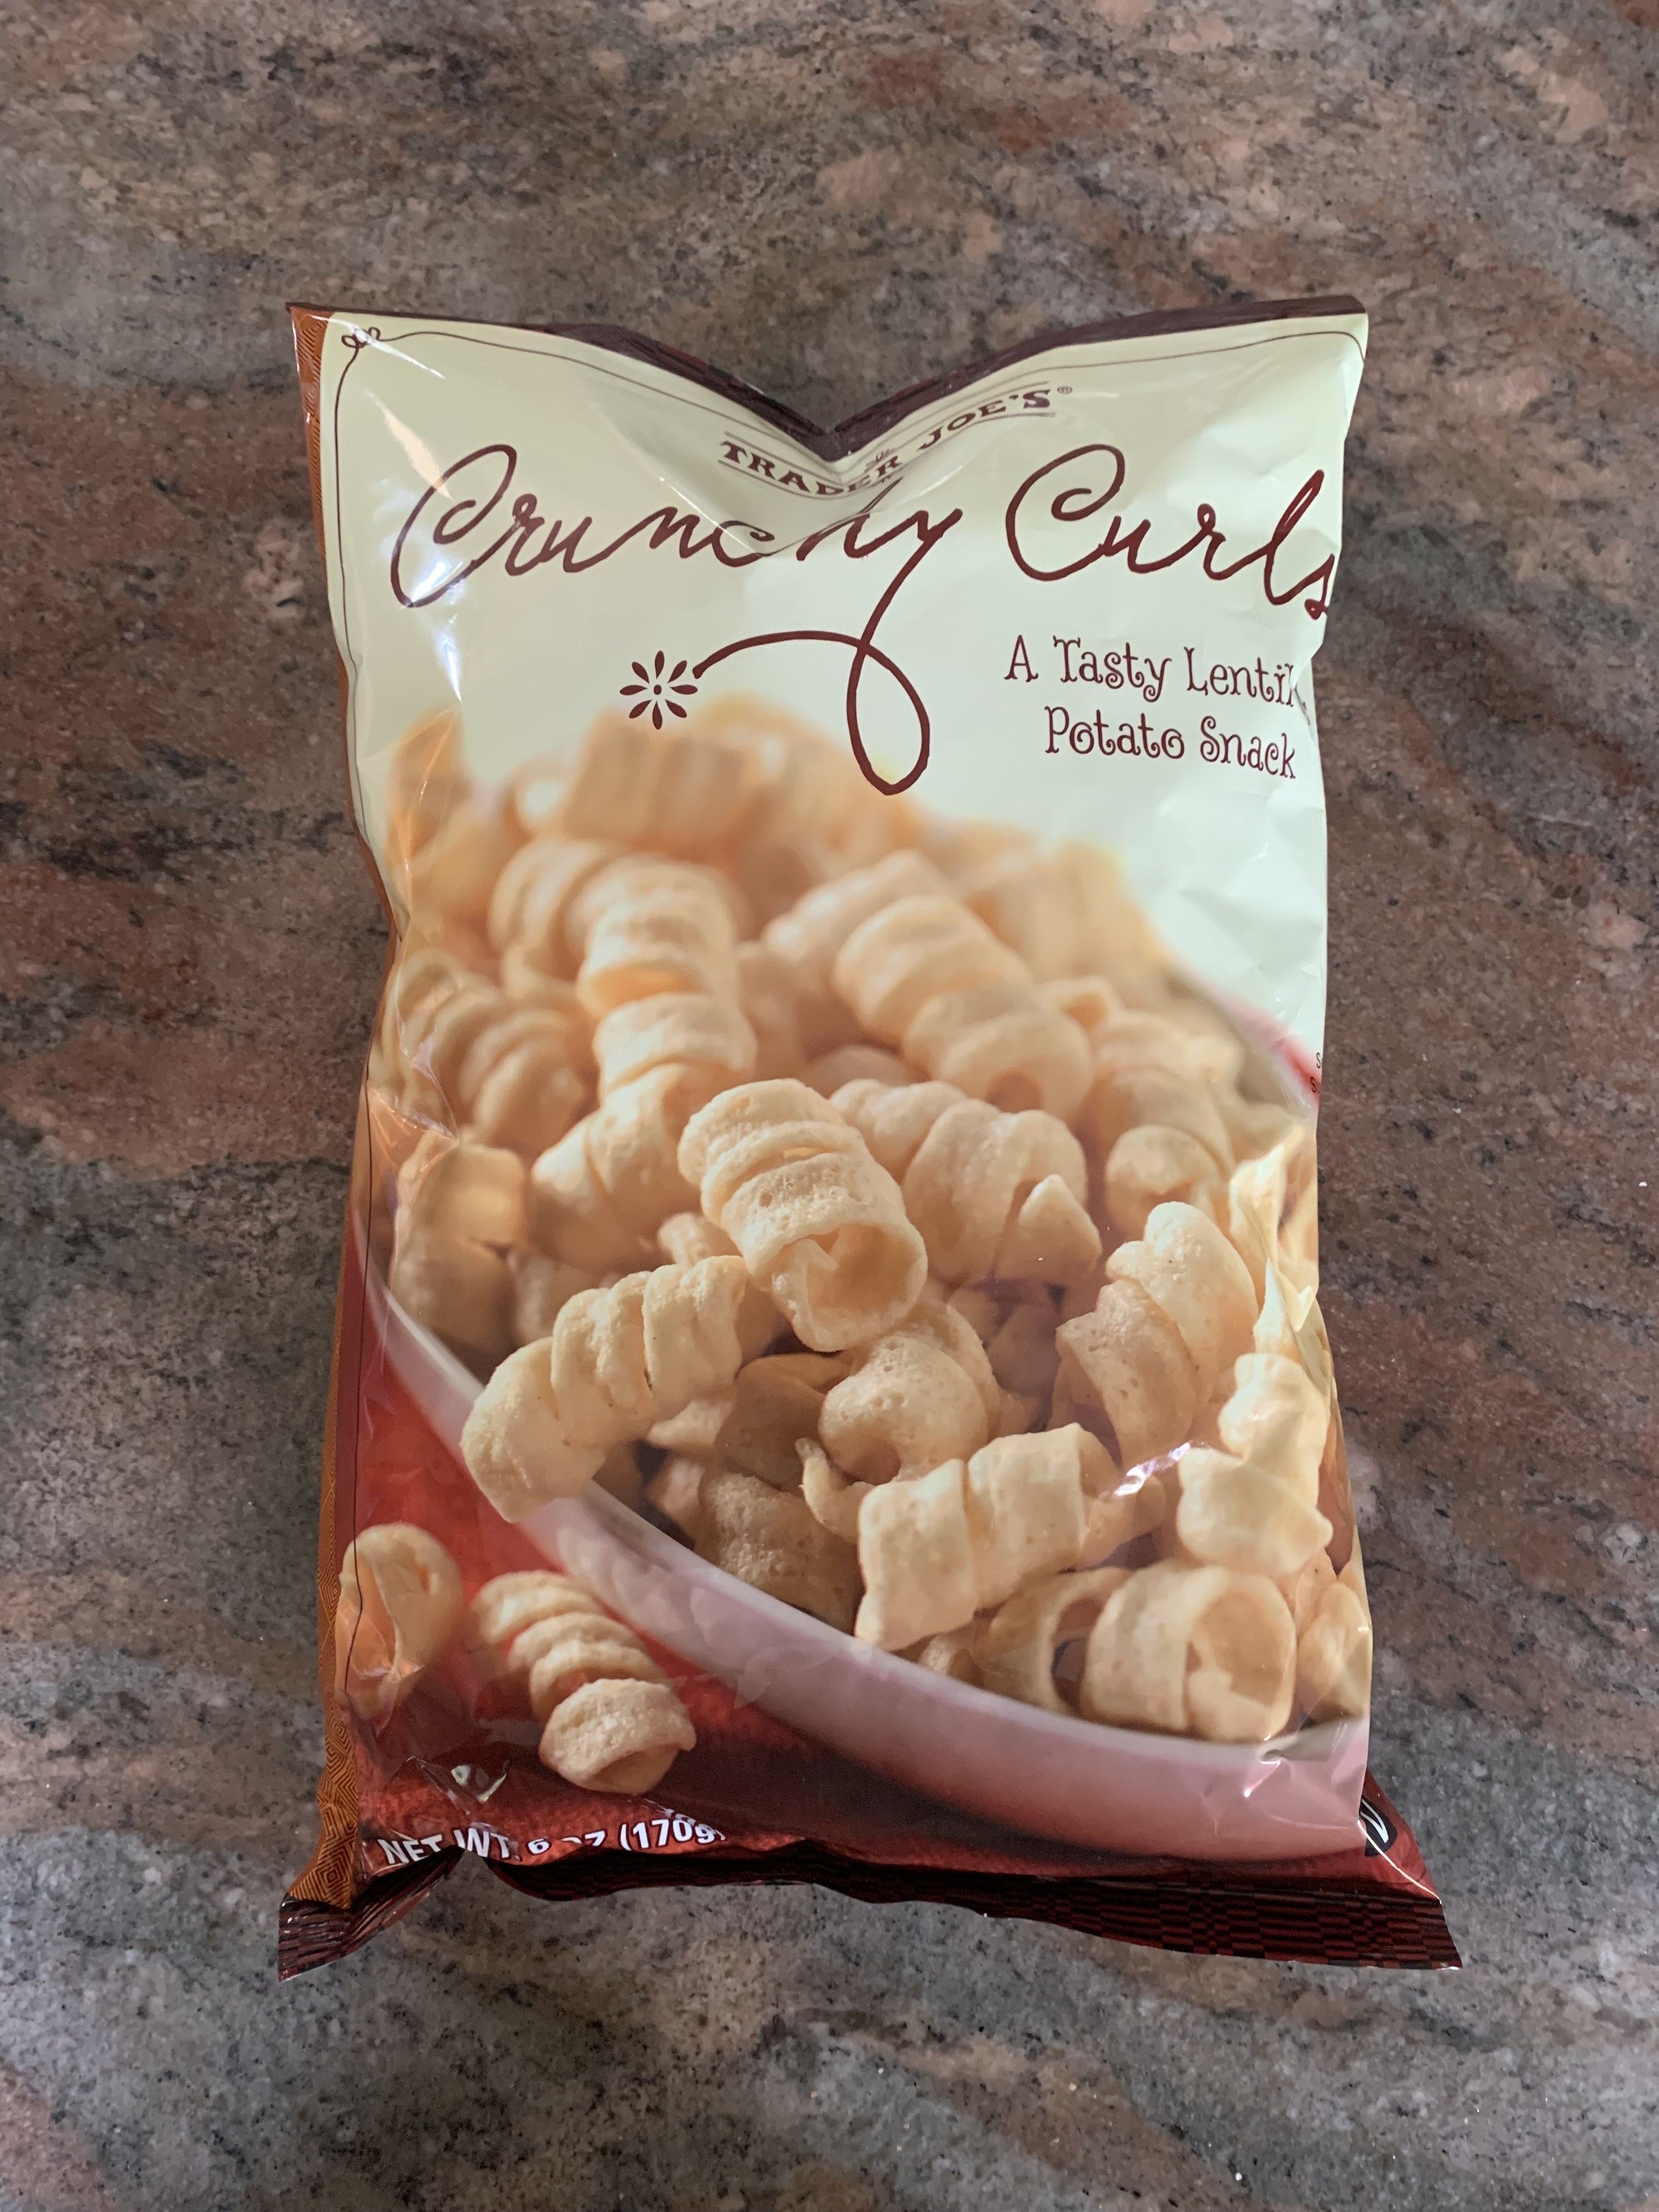 A bag of the crunchy curls laying on the counter